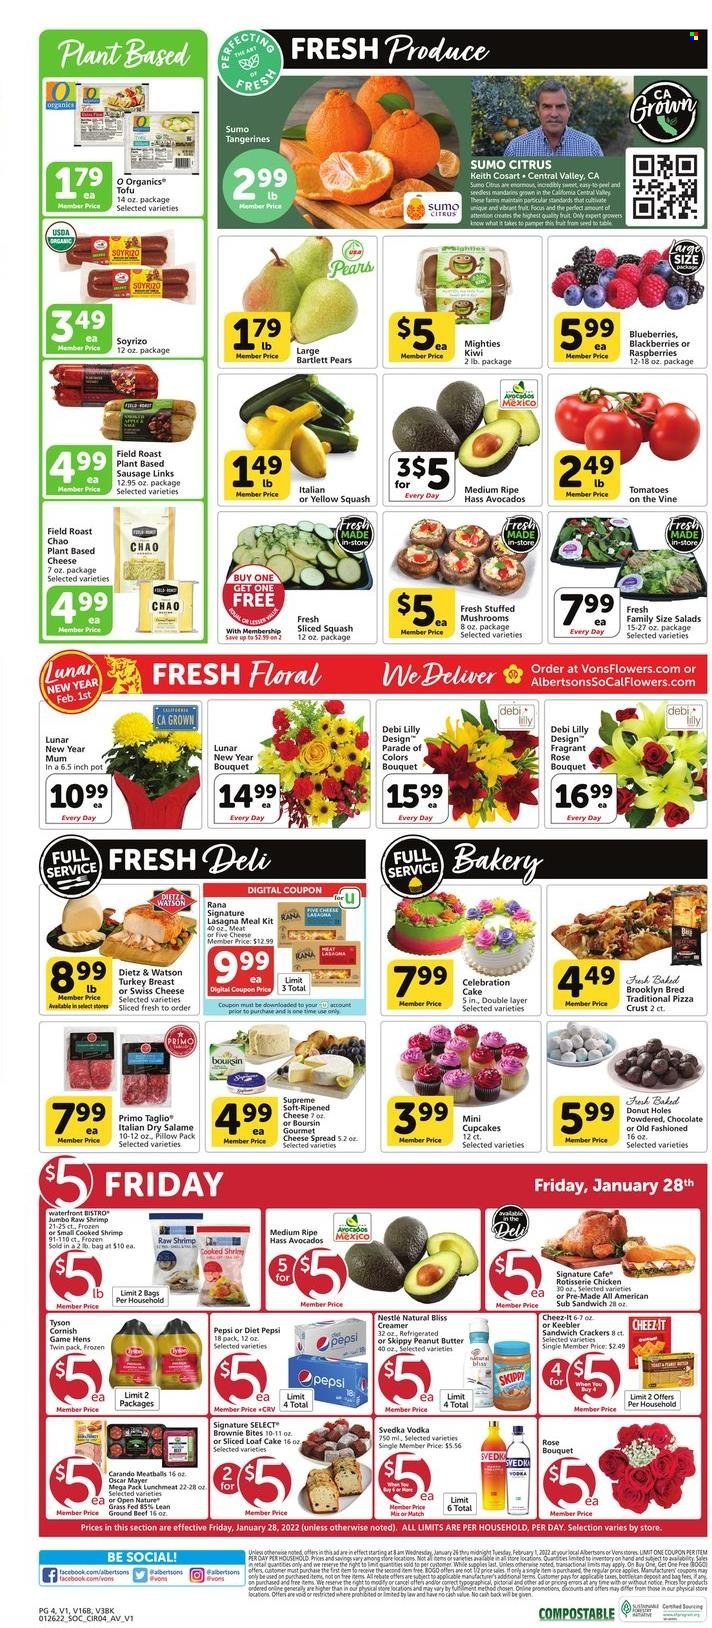 thumbnail - Vons Flyer - 01/26/2022 - 02/01/2022 - Sales products - Bartlett pears, cake, cupcake, donut holes, brownies, loaf cake, yellow squash, avocado, blackberries, blueberries, kiwi, pears, turkey breast, shrimps, pizza, chicken roast, meatballs, lasagna meal, Rana, Oscar Mayer, Dietz & Watson, cheese spread, lunch meat, swiss cheese, tofu, creamer, Nestlé, chocolate, Celebration, crackers, Keebler, Cheez-It, peanut butter, Pepsi, Diet Pepsi, wine, rosé wine, vodka, beer, Mum, pot, bouquet, rose, tangerines, sumo citrus. Page 4.